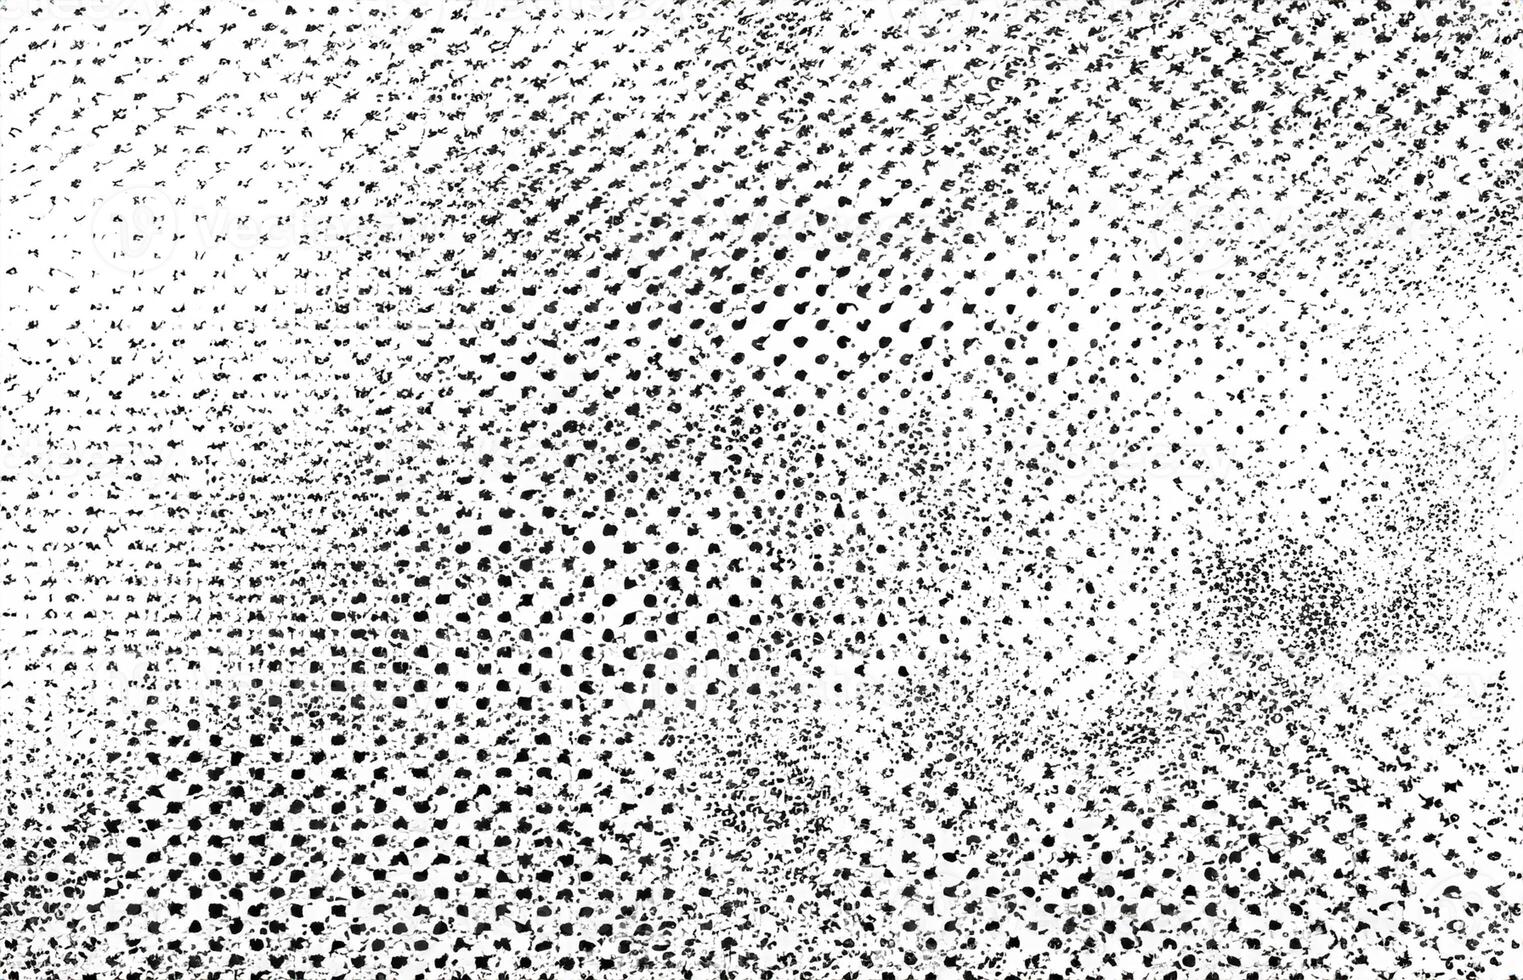 Contrasting Black and White Rough Texture Overlay, Grunge Abstract Background. photo